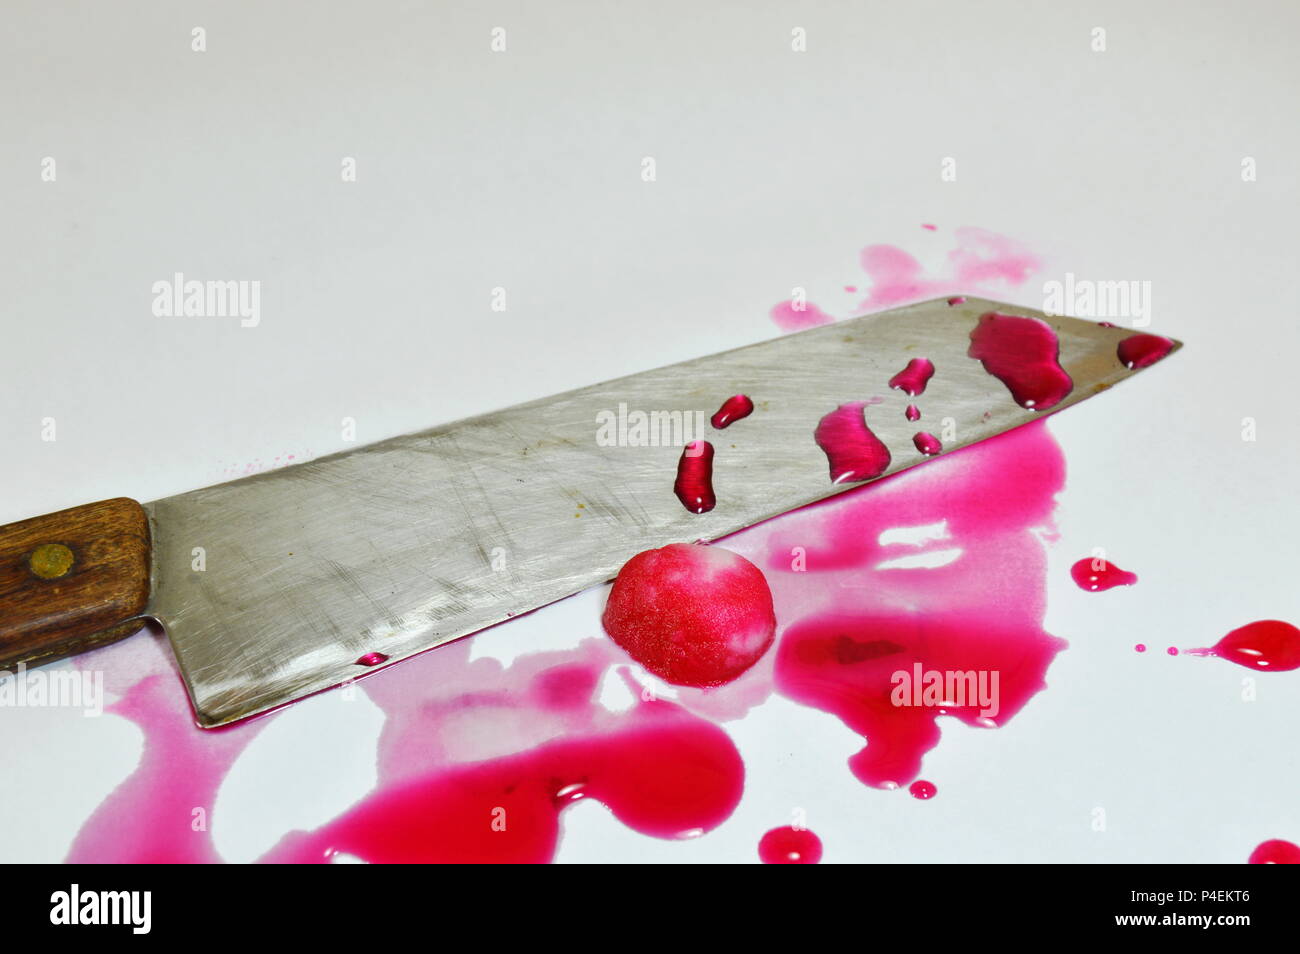 knife and cotton with blood Stock Photo